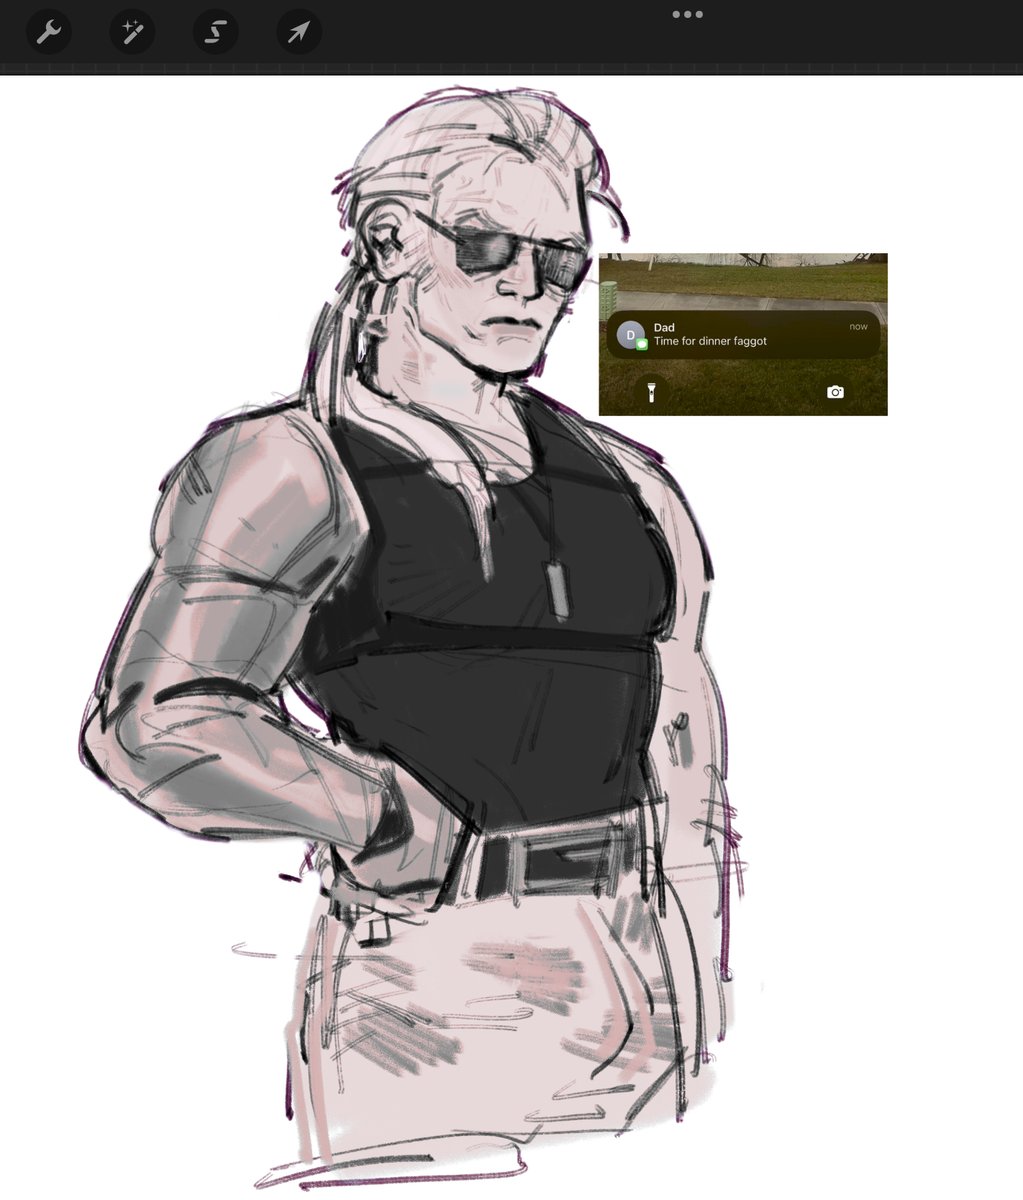 she needs a box of marlboro menthol gold 100s and an iced tea #mgs